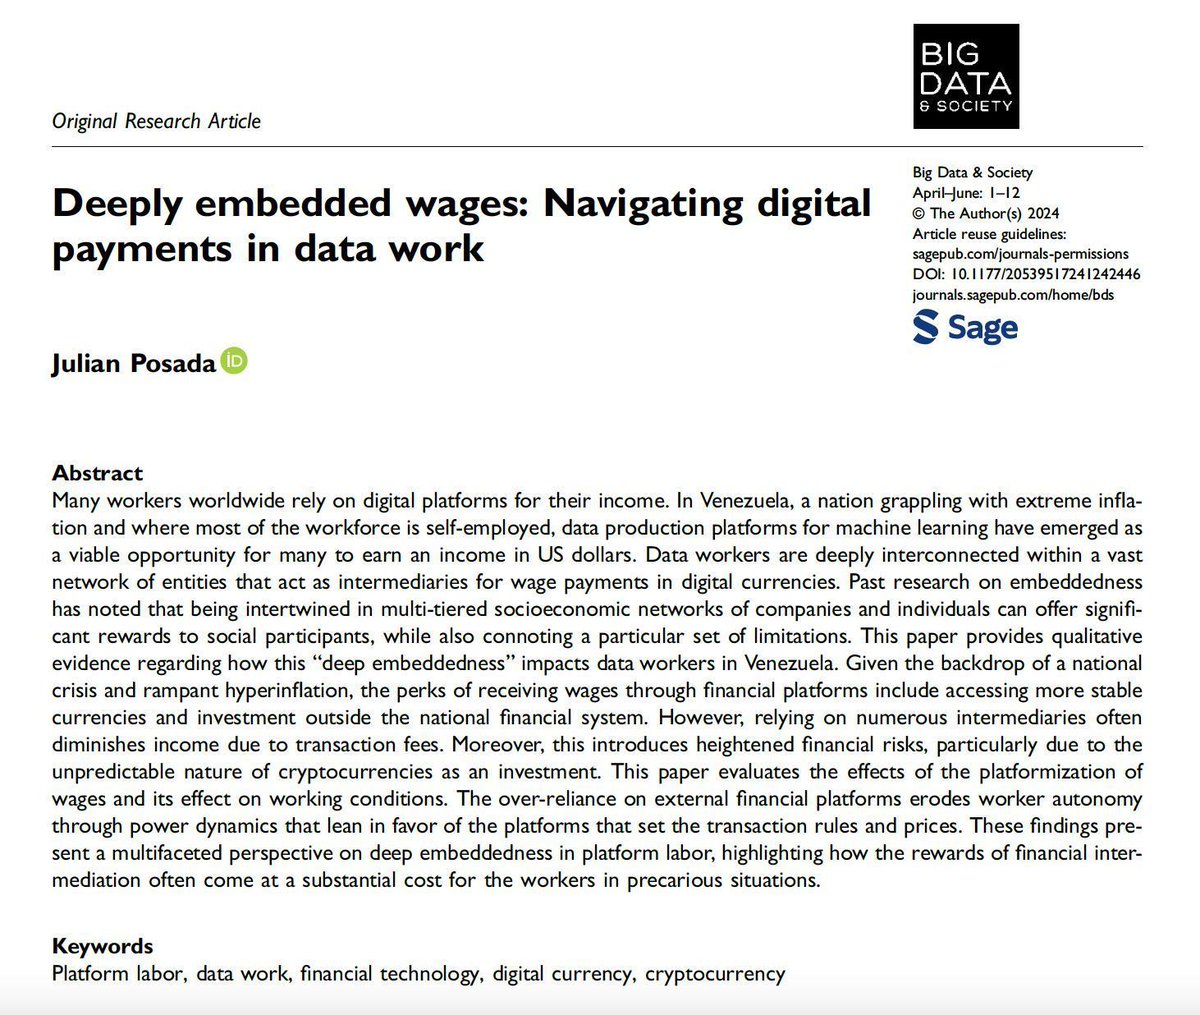 📣 New paper is out! ‘Deeply embedded wages: Navigating digital payments in data work’ from the special theme on Critical Data Studies in Latin America by Juilan Posada (@JulianPosada0). #platformlabor #datawork #cryptocurrency Read here: buff.ly/4b6sgcH